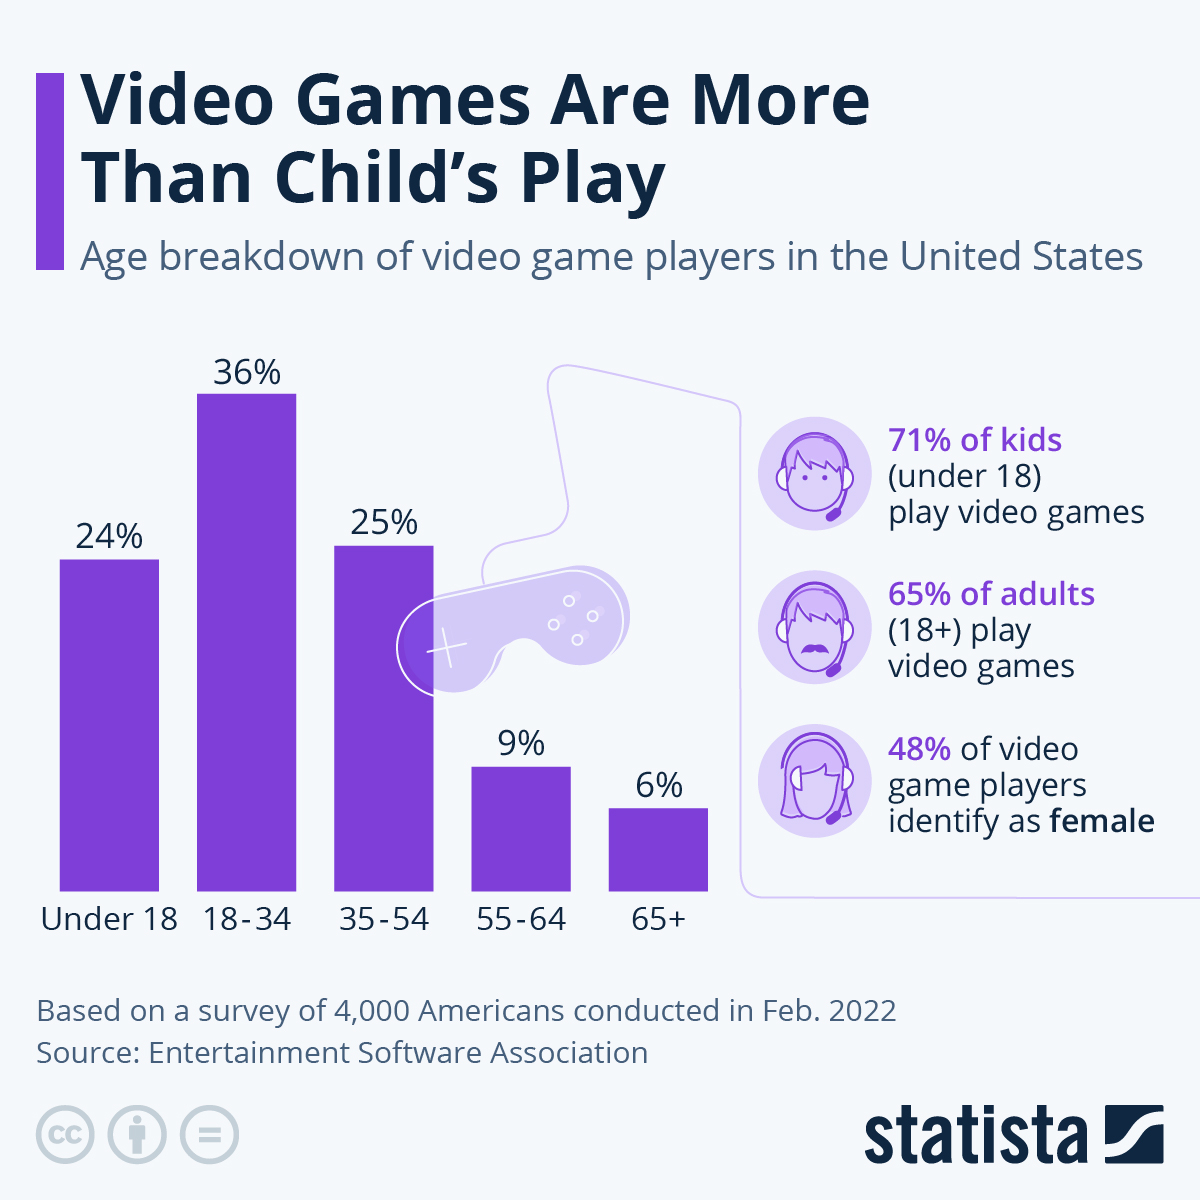 Video Games Are More Than Child's Play